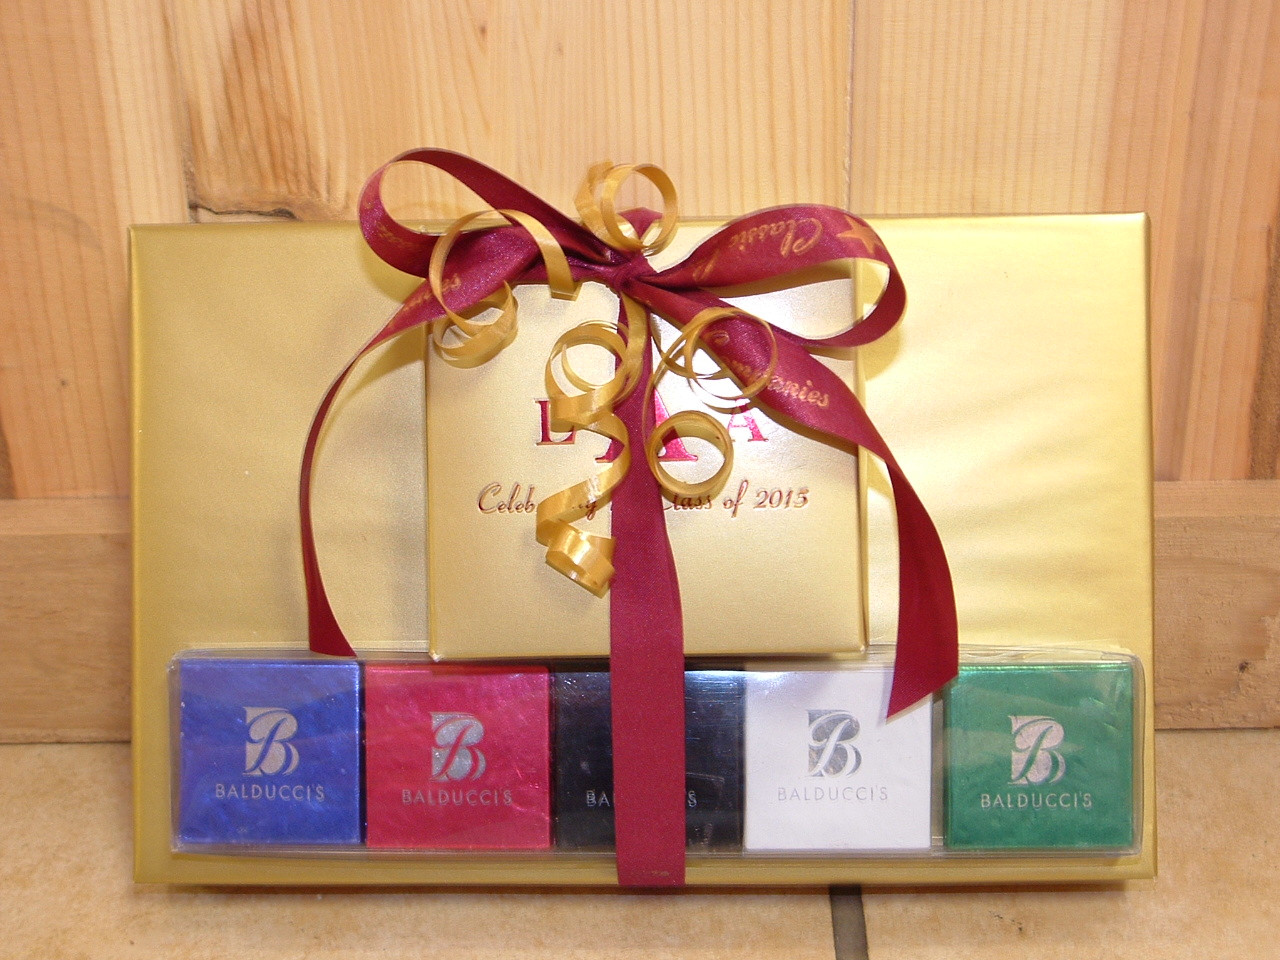 Corporate Christmas Gift Ideas
 Great Corporate Holiday Gift Ideas of Chocolate and or